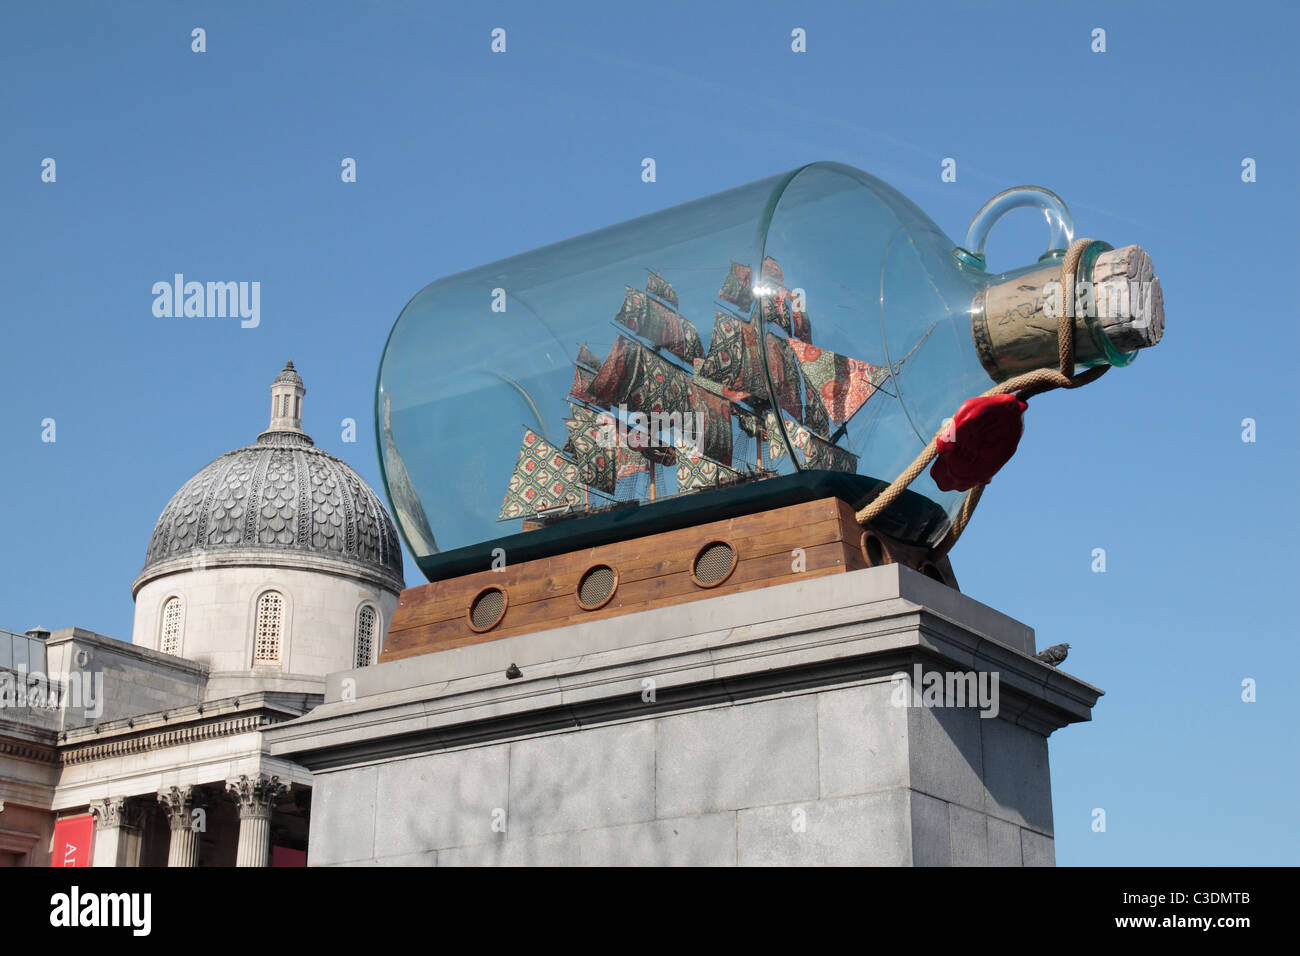 'Nelson's Ship in a Bottle', an art installation by Yinka Shonibare on the fourth plinth in Trafalgar Square, London, UK. Stock Photo